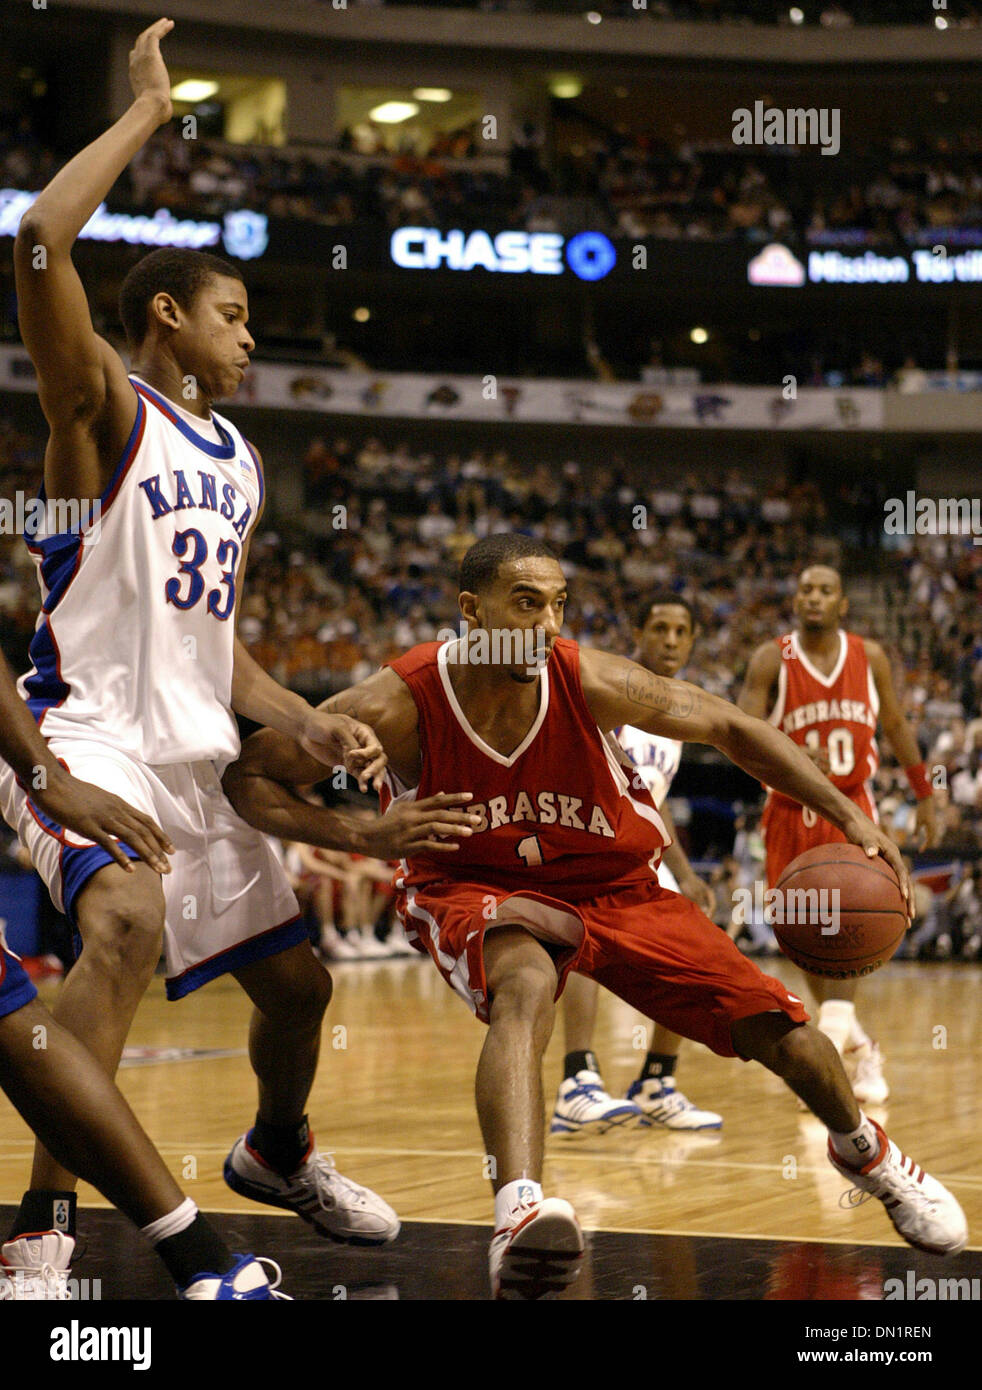 Mar 11, 2006; Dallas, TX, USA; NCAA BASKETBALL: Nebraska's Jason Dourisseau looks for room around Kansas' C.J. Giles during the 2006 Phillips 66 Big 12 Men's Championship Saturday March 11, 2006 at the American Airlines Center in Dallas. Mandatory Credit: Photo by EA Ornelas/San Antonio Express-News/ZUMA Press. (©) Copyright 2006 by San Antonio Express-News Stock Photo